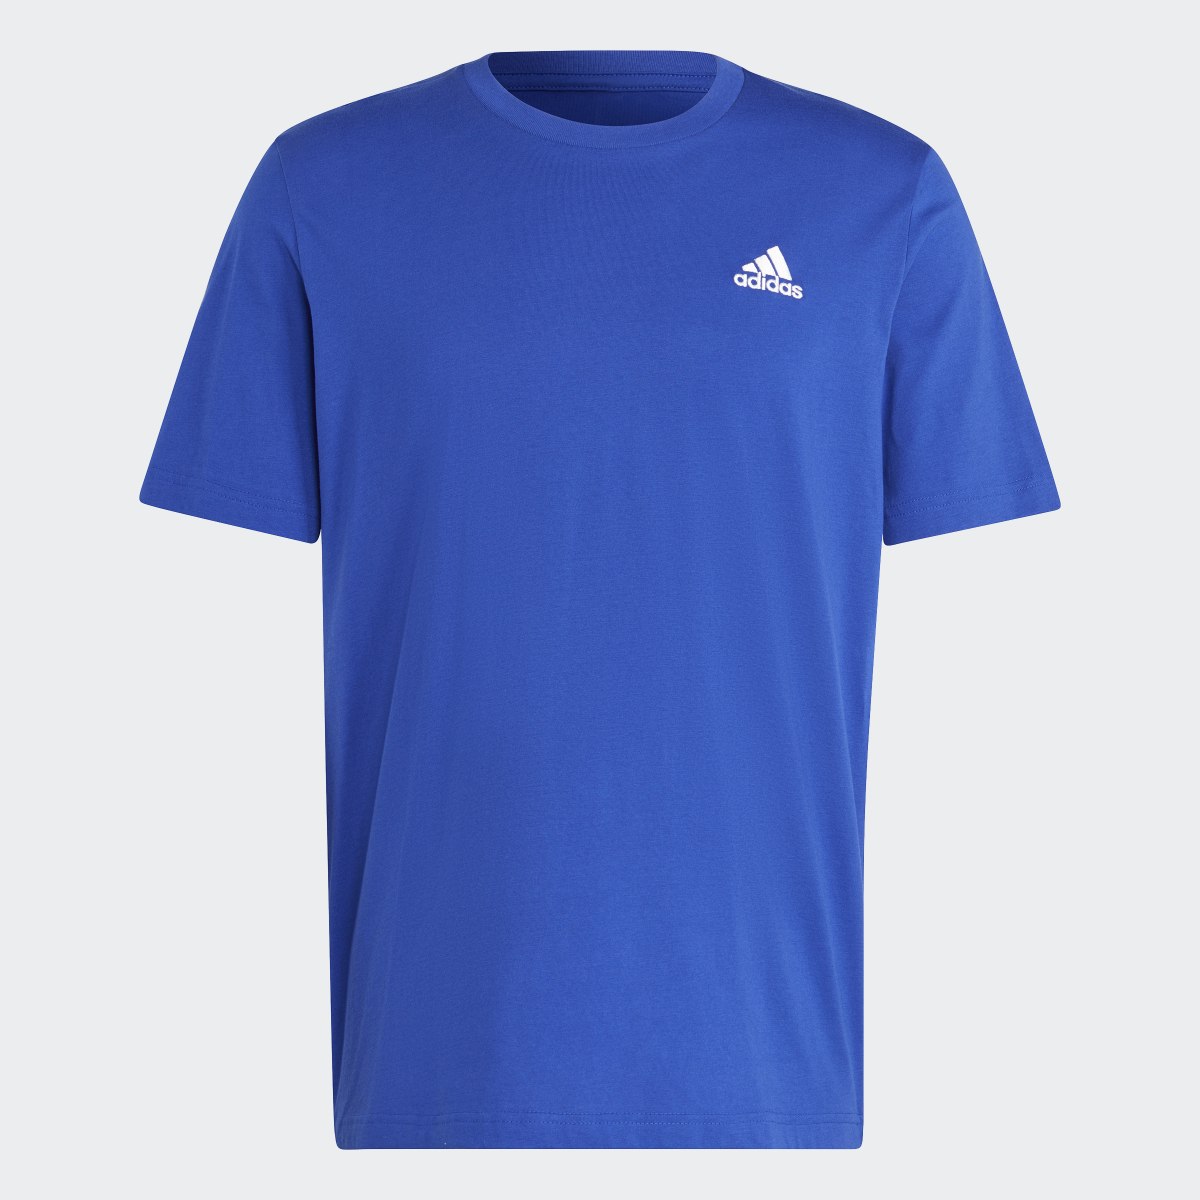 Adidas Essentials Single Jersey Embroidered Small Logo T-Shirt. 5